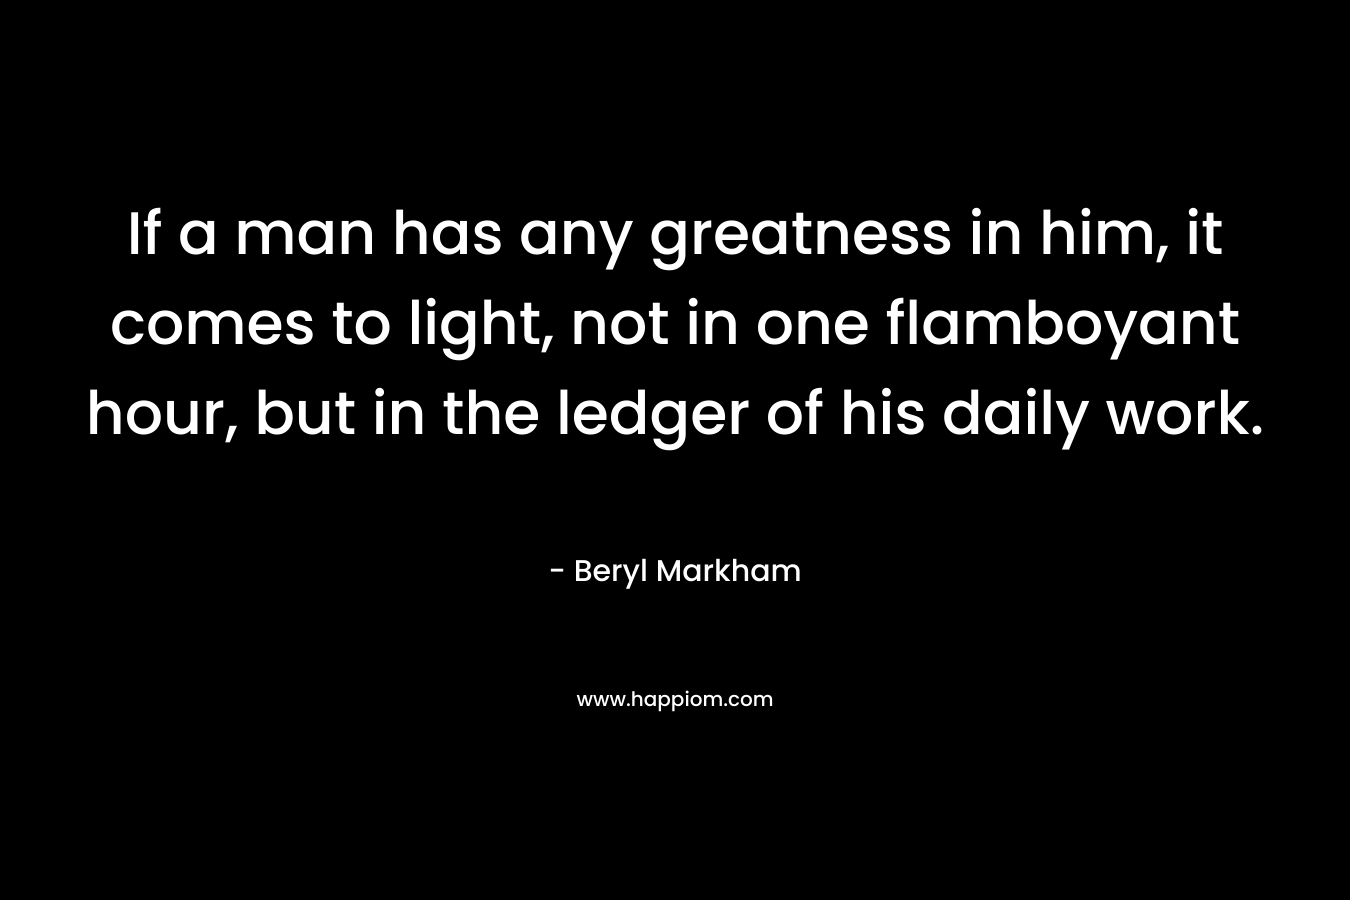 If a man has any greatness in him, it comes to light, not in one flamboyant hour, but in the ledger of his daily work. – Beryl Markham